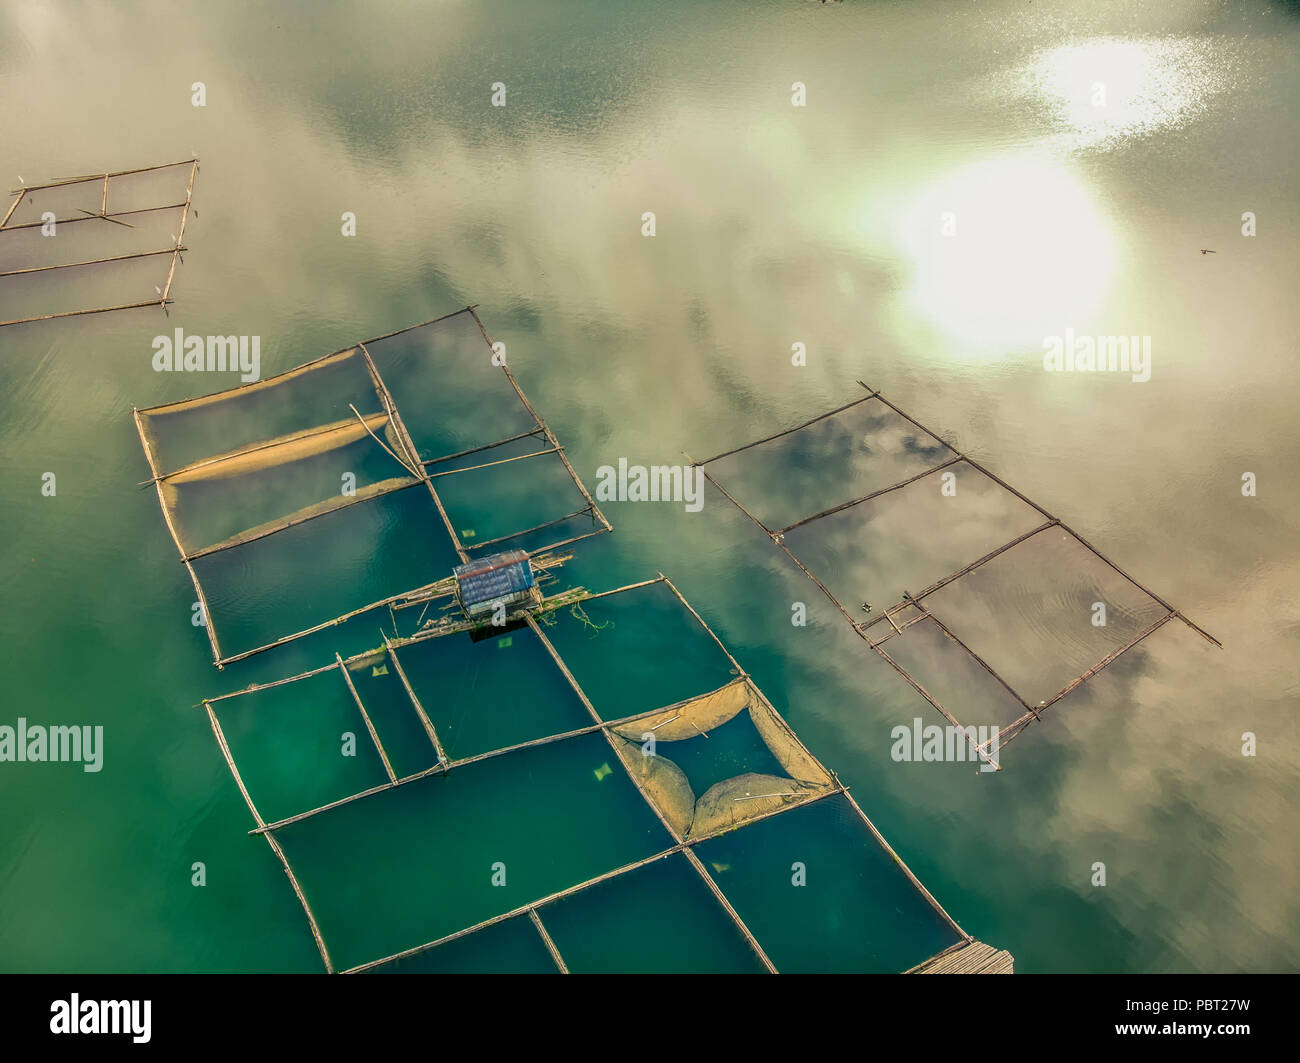 Bamboo rafts and cloud and sun reflection at Lake Mohicap, San Pablo City, Laguna, Philippines Stock Photo